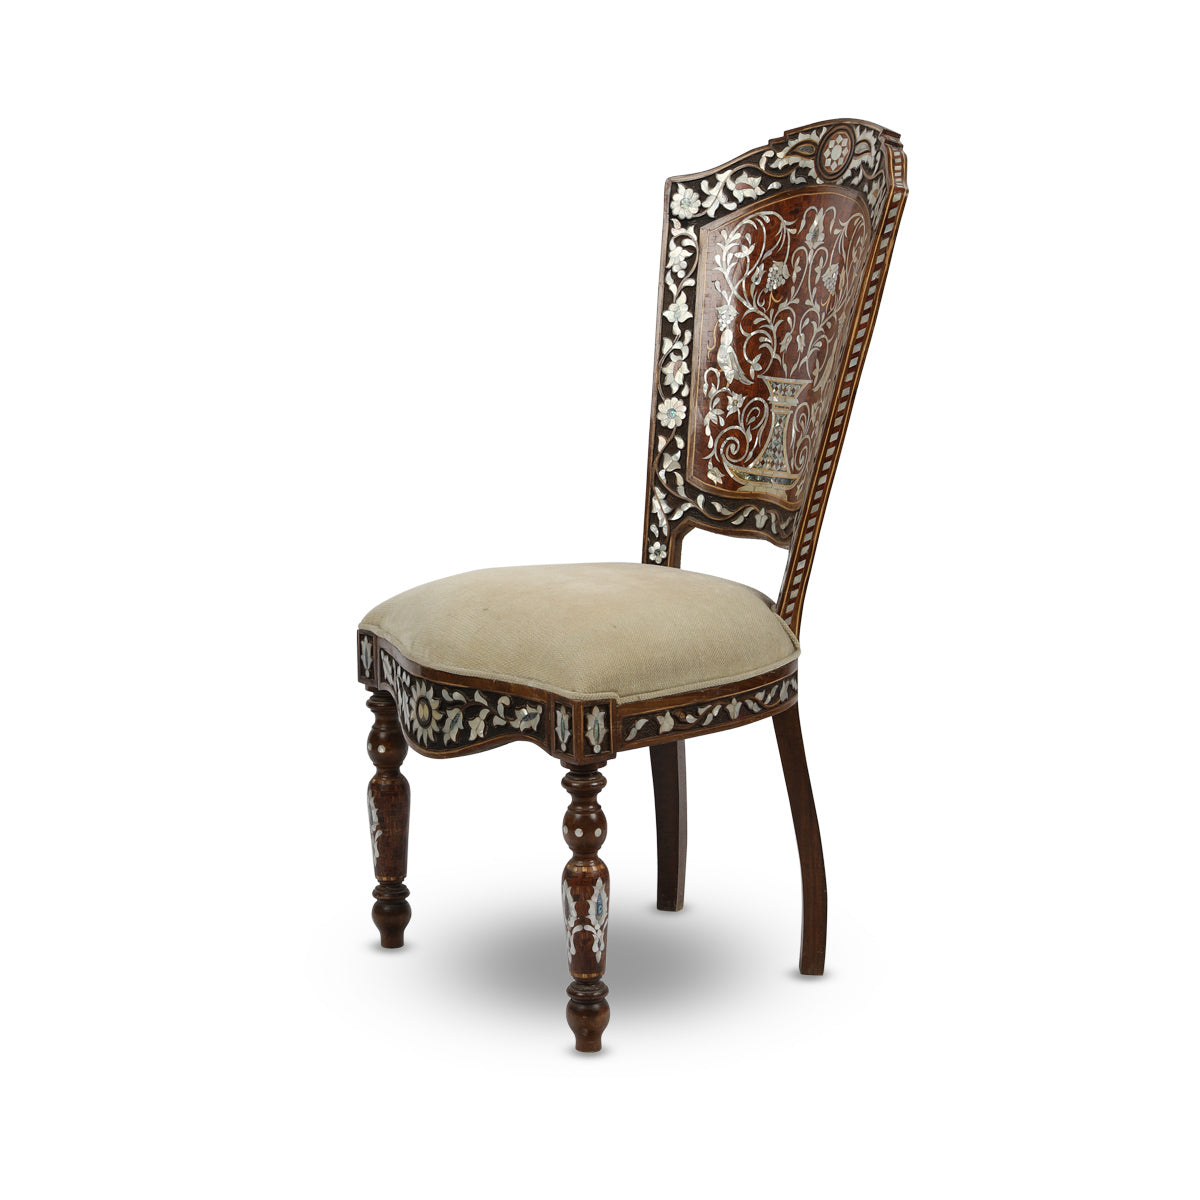 Angled Side view of Mother of Pearl Inlaid Arabian Flat Back Chair